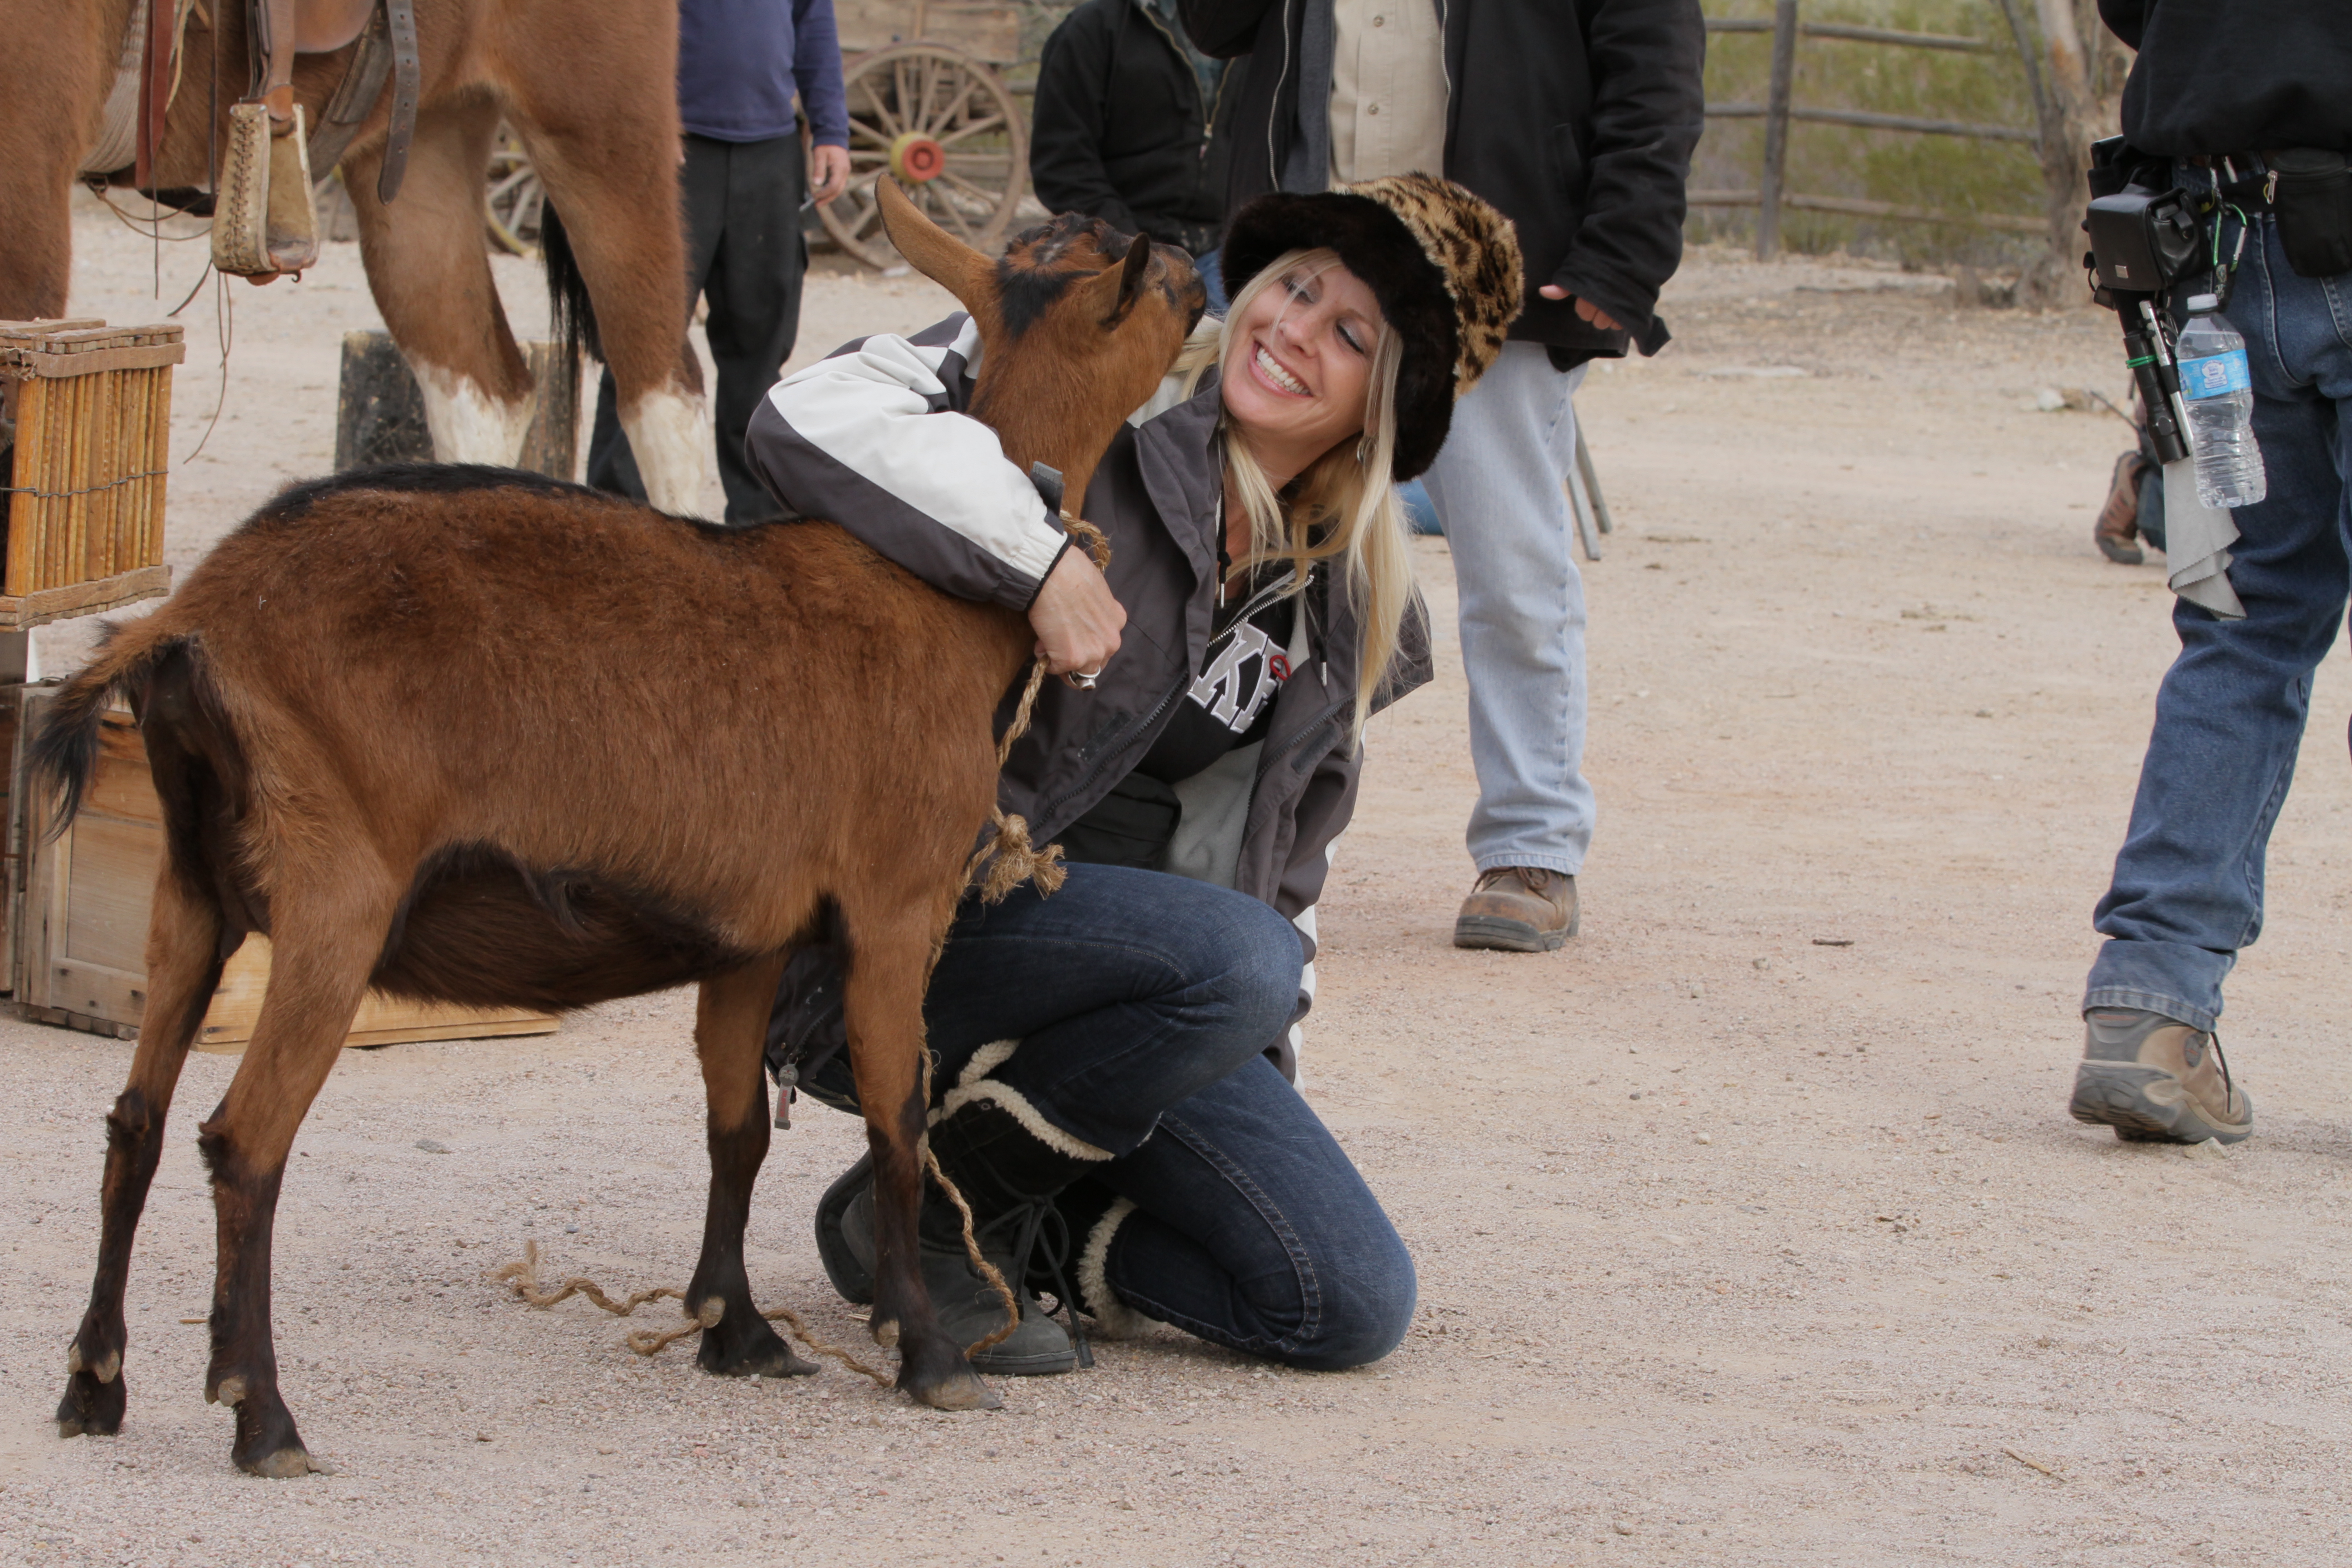 Taking a break on set with a goat while shooting HBSD in Tucson, AZ.